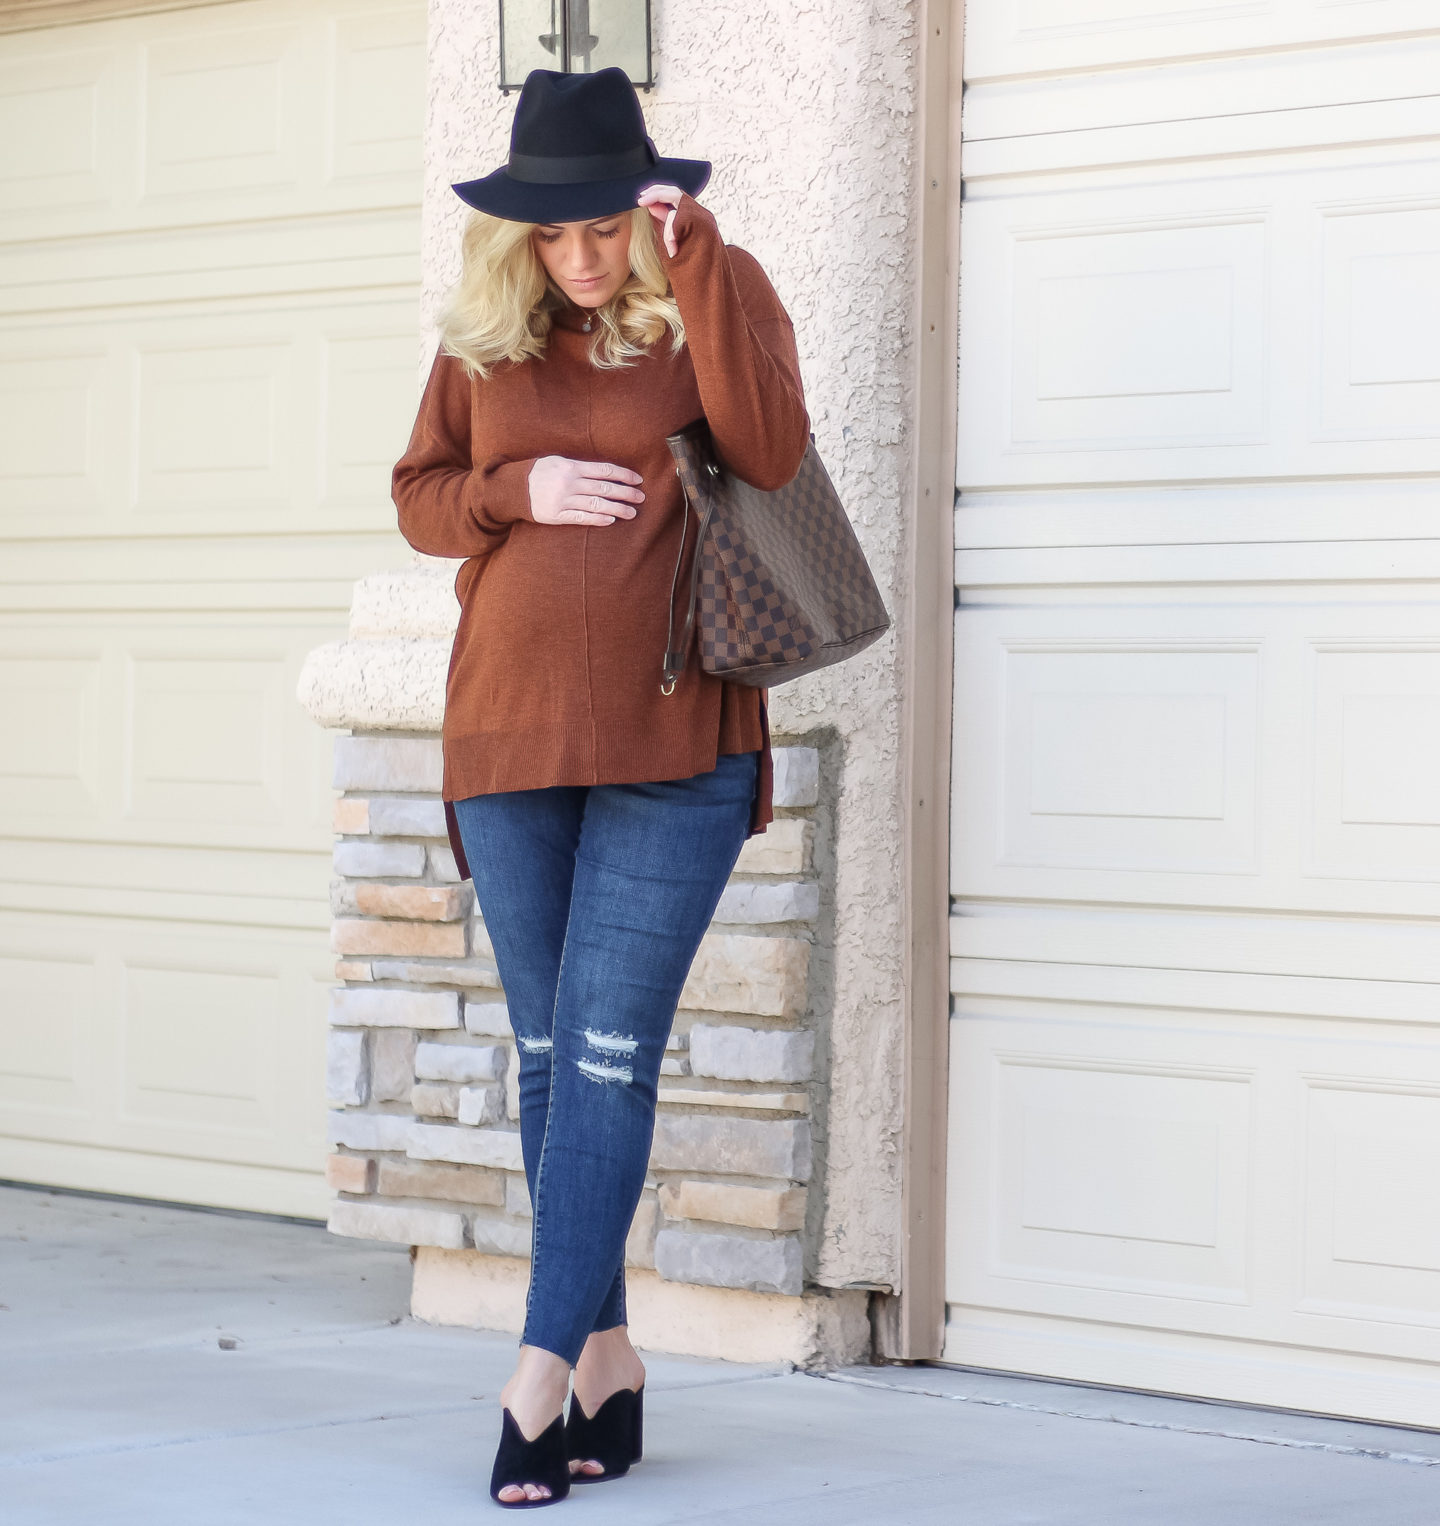 Fall Outfit with Colors that are Usually Taboo Together